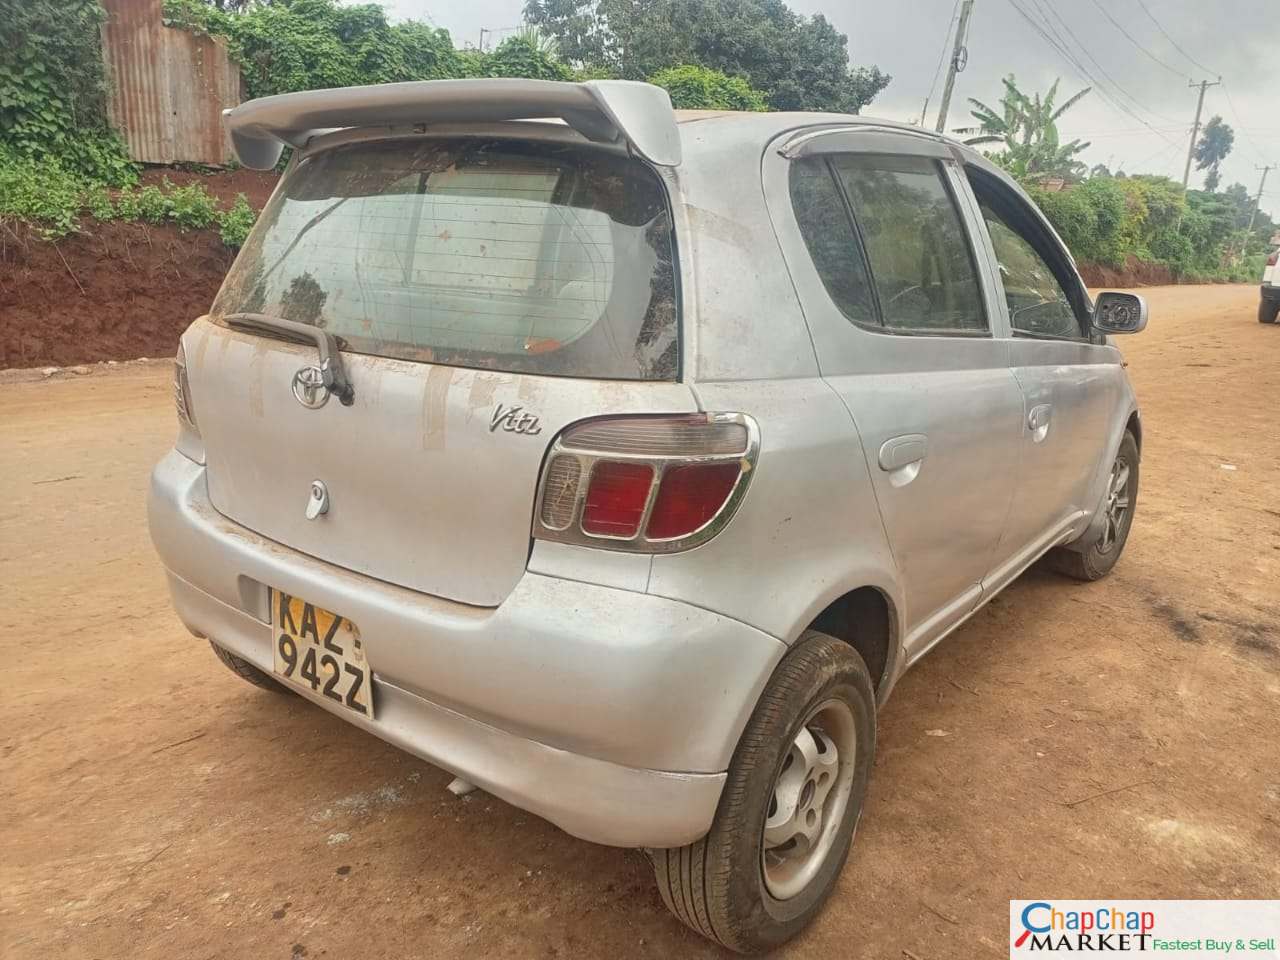 Toyota Vitz 260k You Pay 30% Deposit Trade in OK EXCLUSIVE